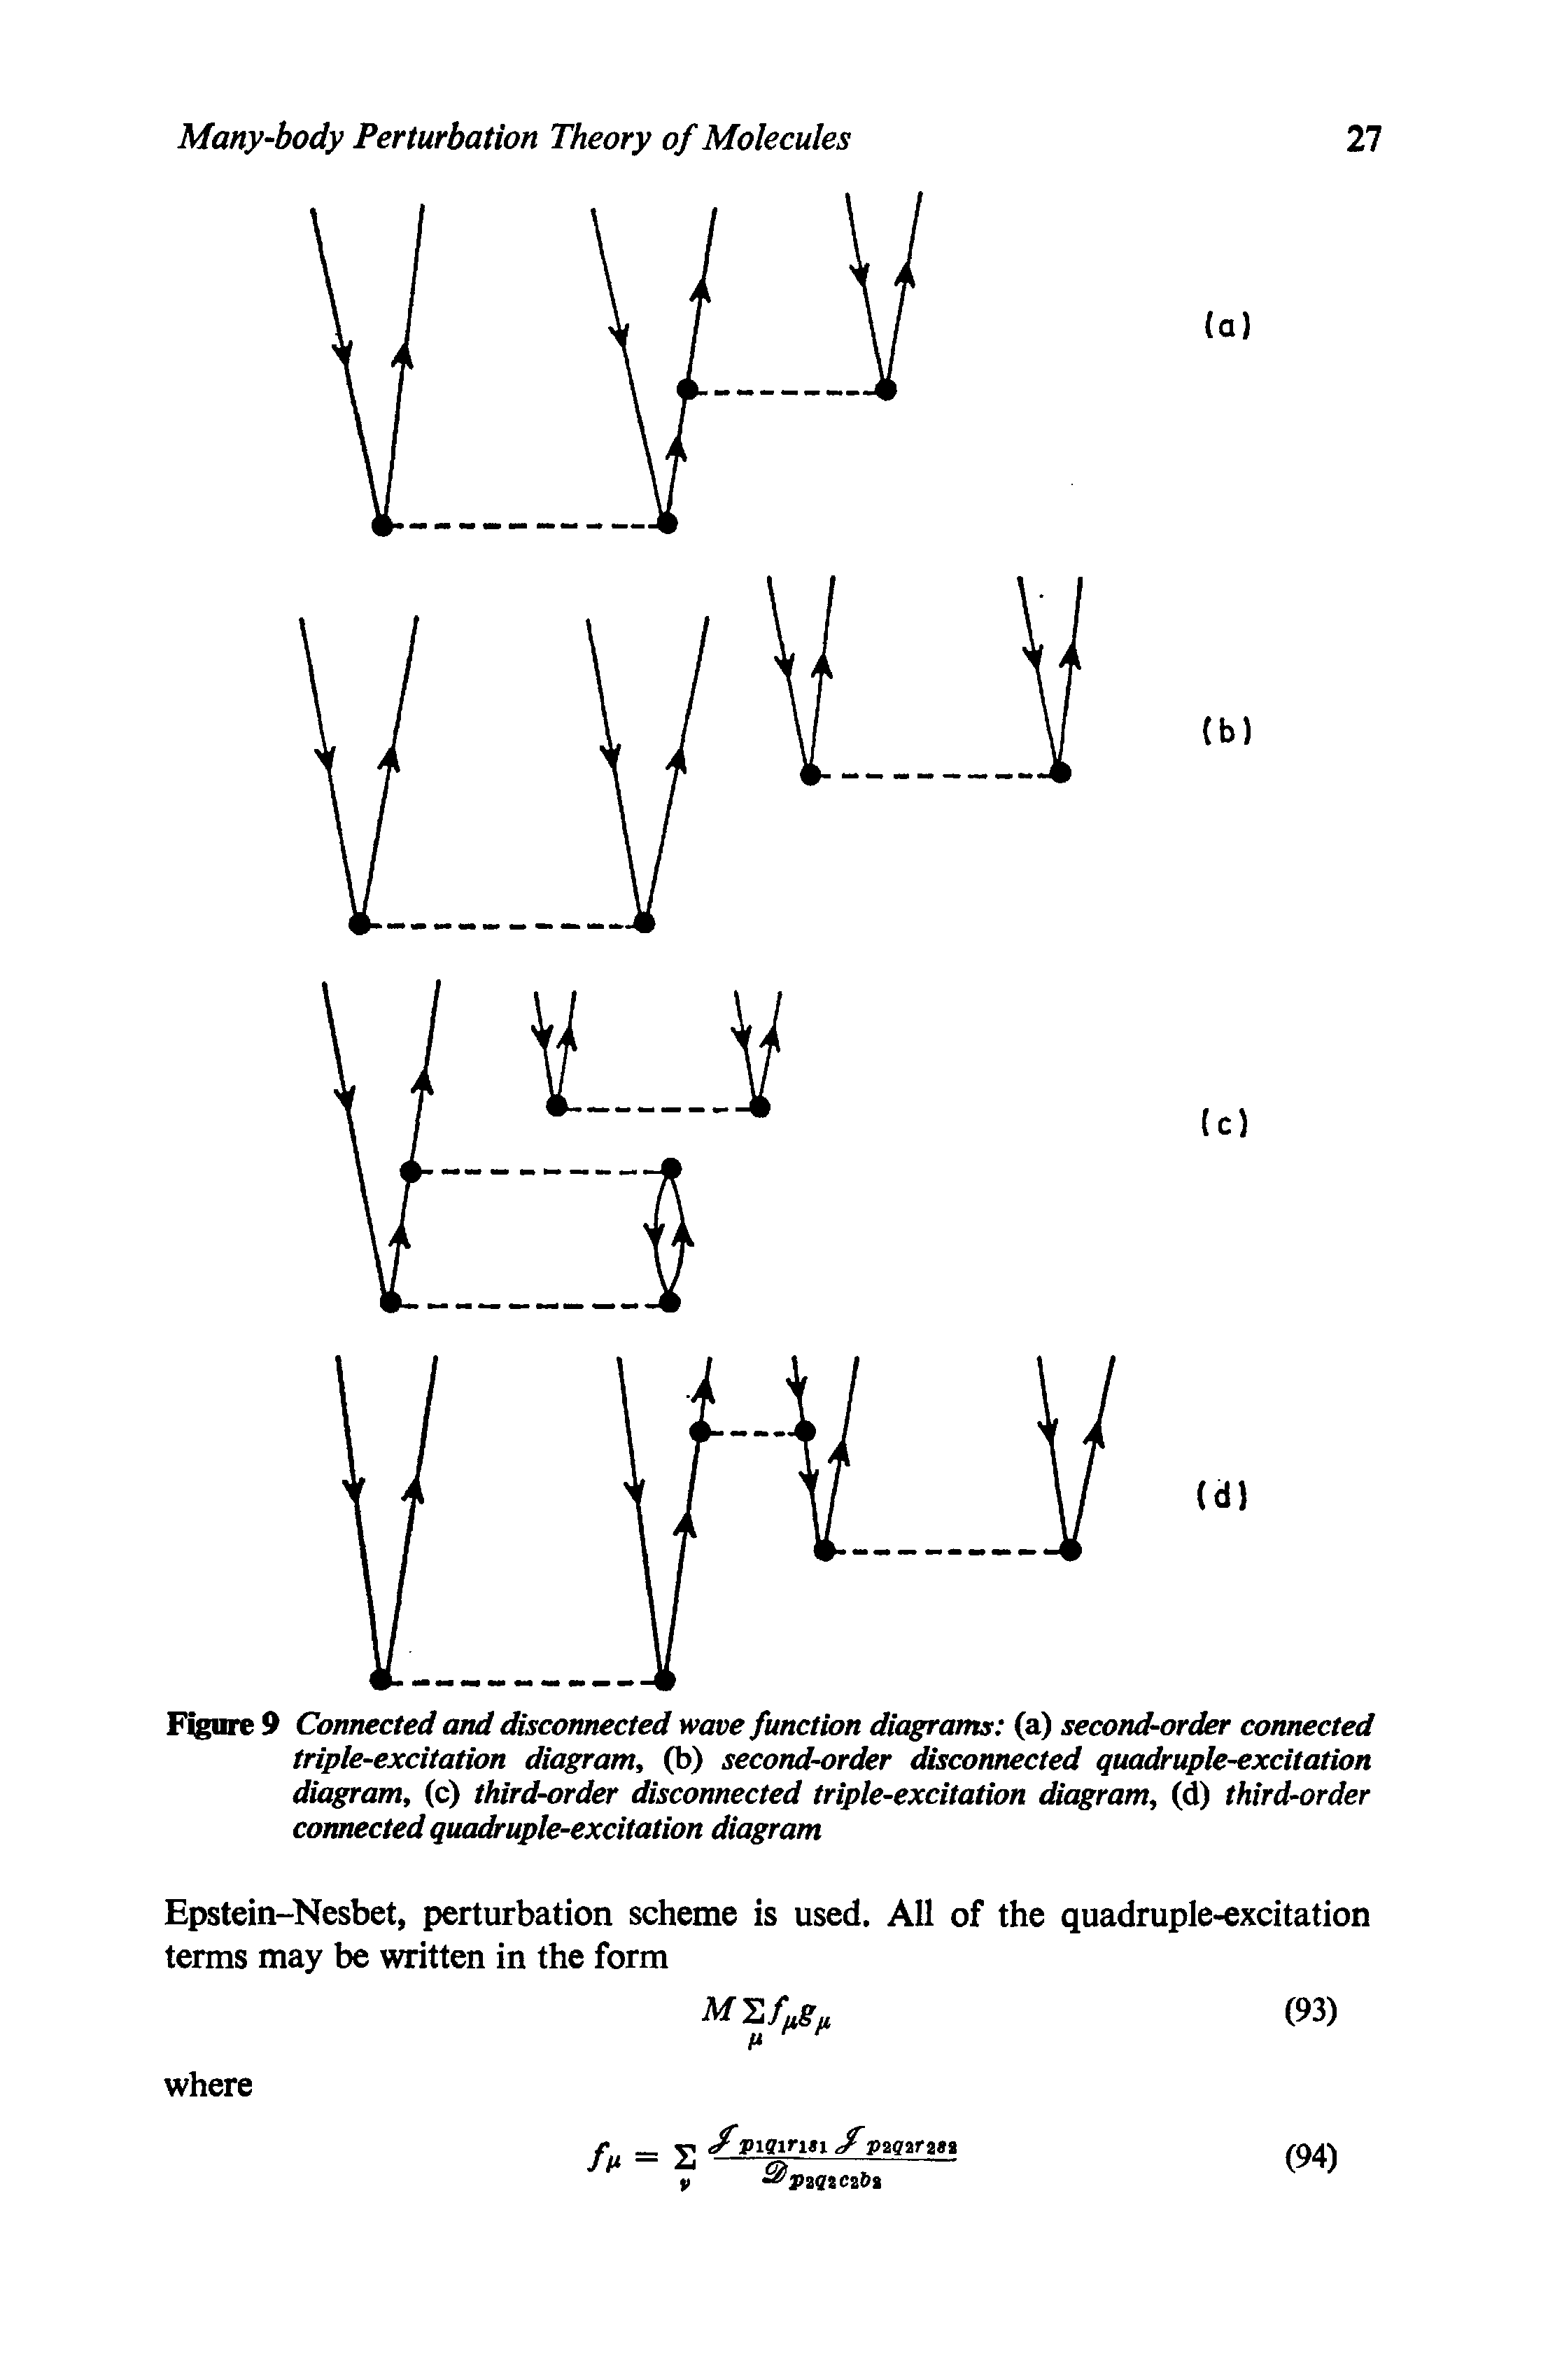 Figure 9 Connected and disconnected wave function diagrams (a) second-order connected triple-excitation diagram, (b) second-order disconnected quadruple-excitation diagram, (c) third-order disconnected triple-excitation diagram, (d) third-order connected quadruple-excitation diagram...